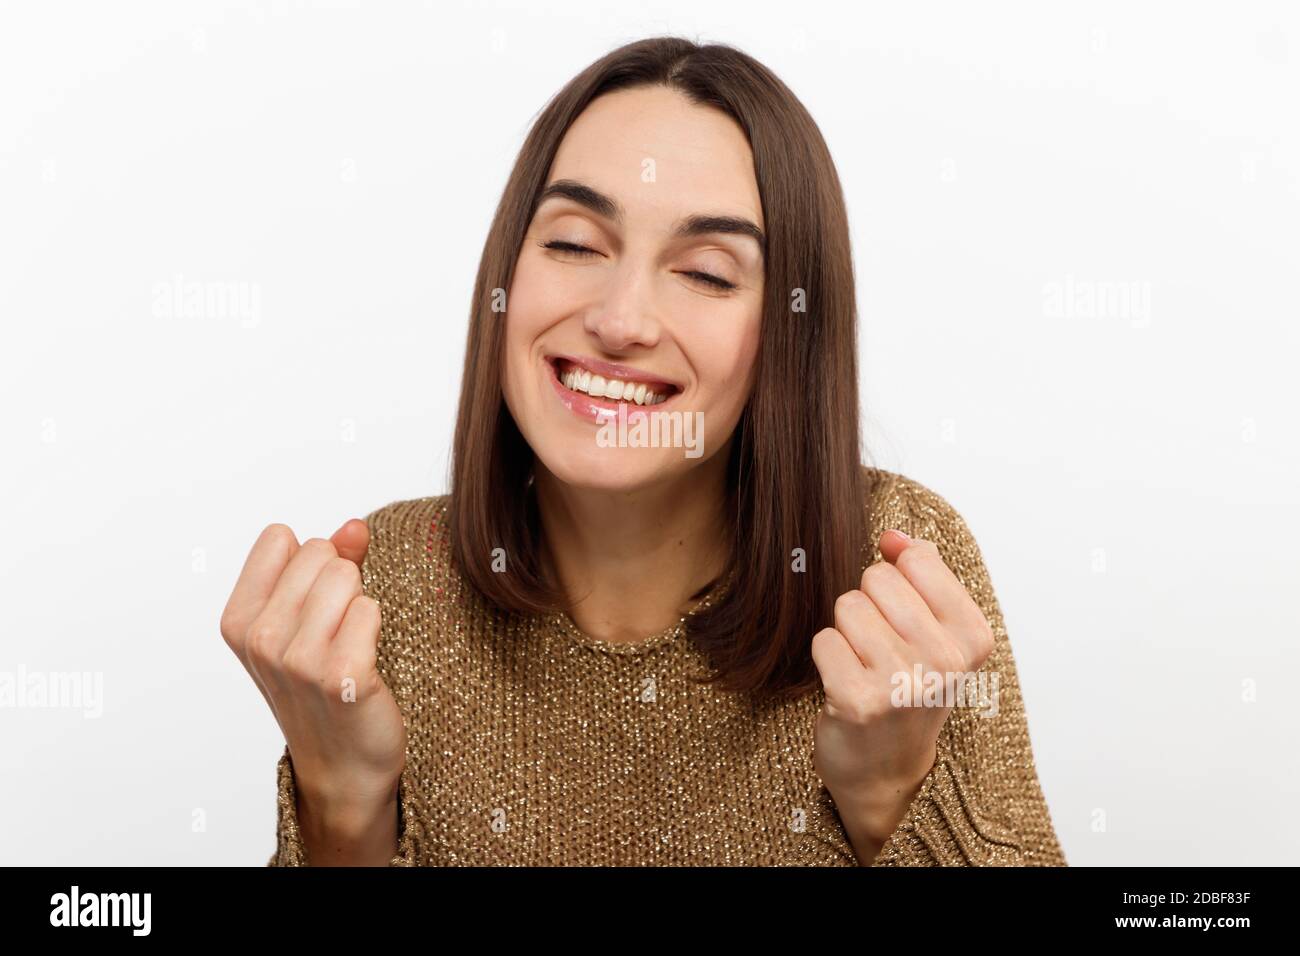 Cheerful happy young beautiful girl looking at camera smiling laughing over white background. Stock Photo